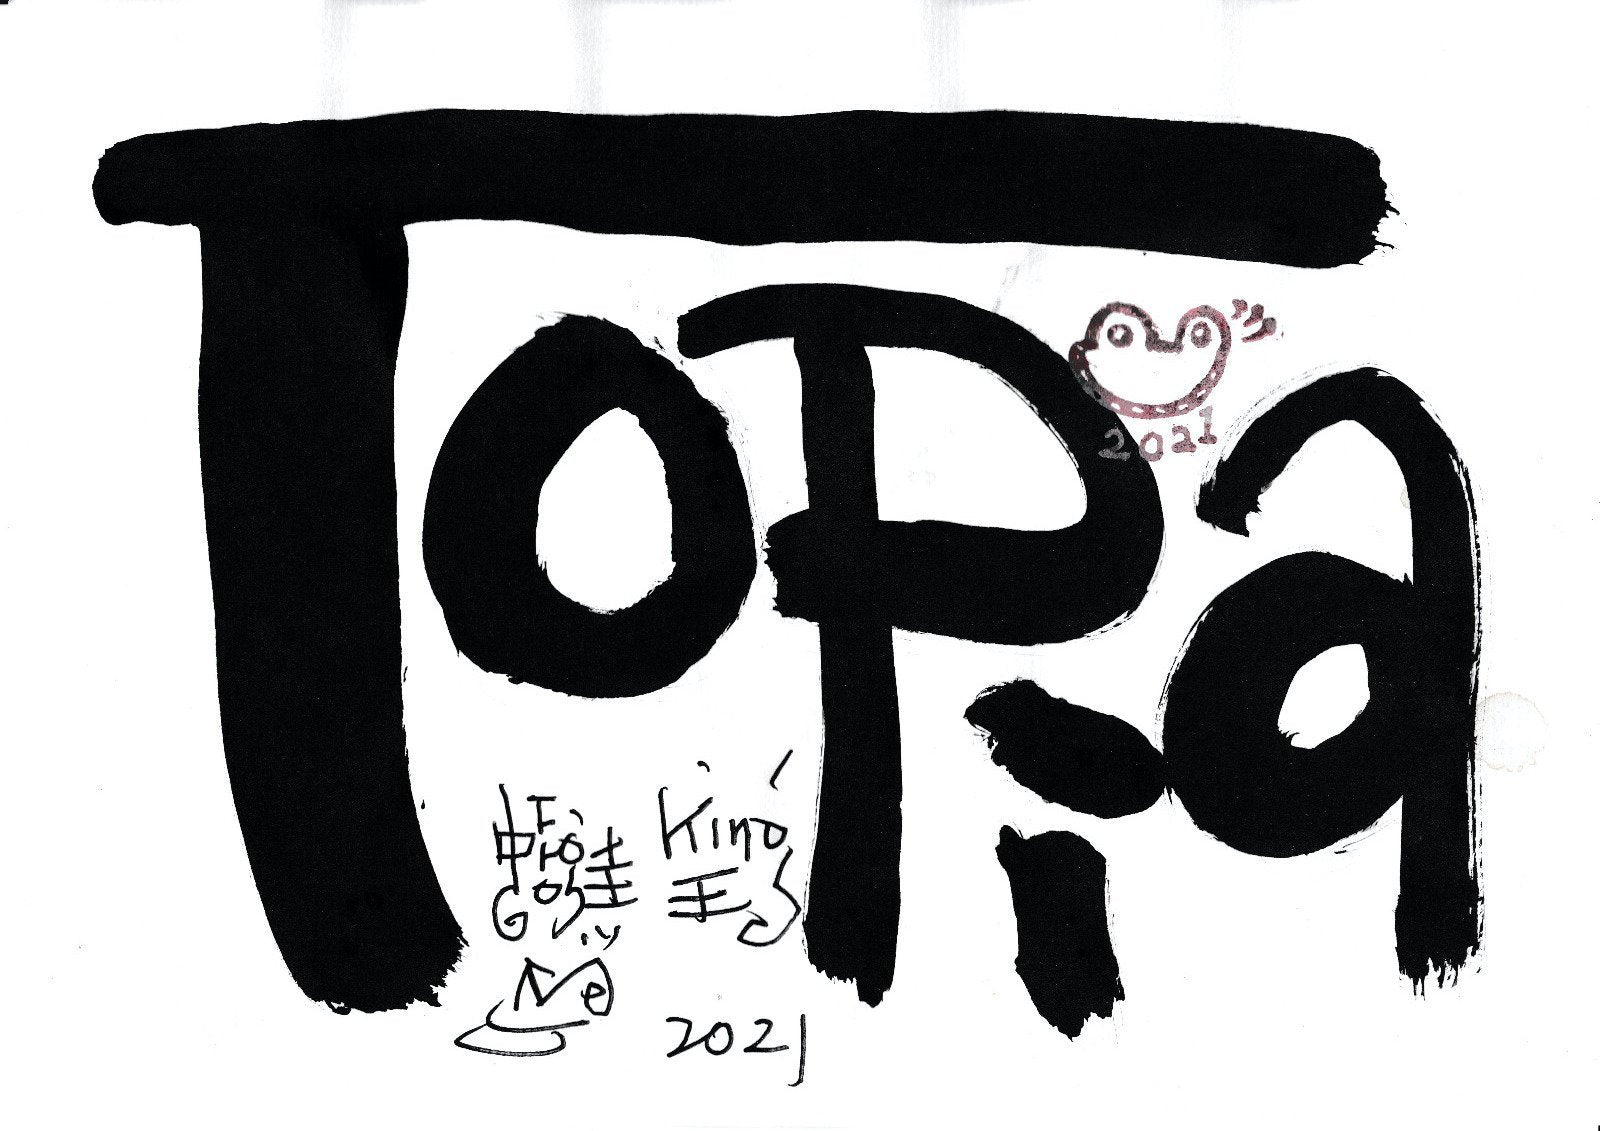 Topia is a text-based artwork featuring the title written on a calligraphic manner with Frog King signature and a maroon-colored frog as his brand.